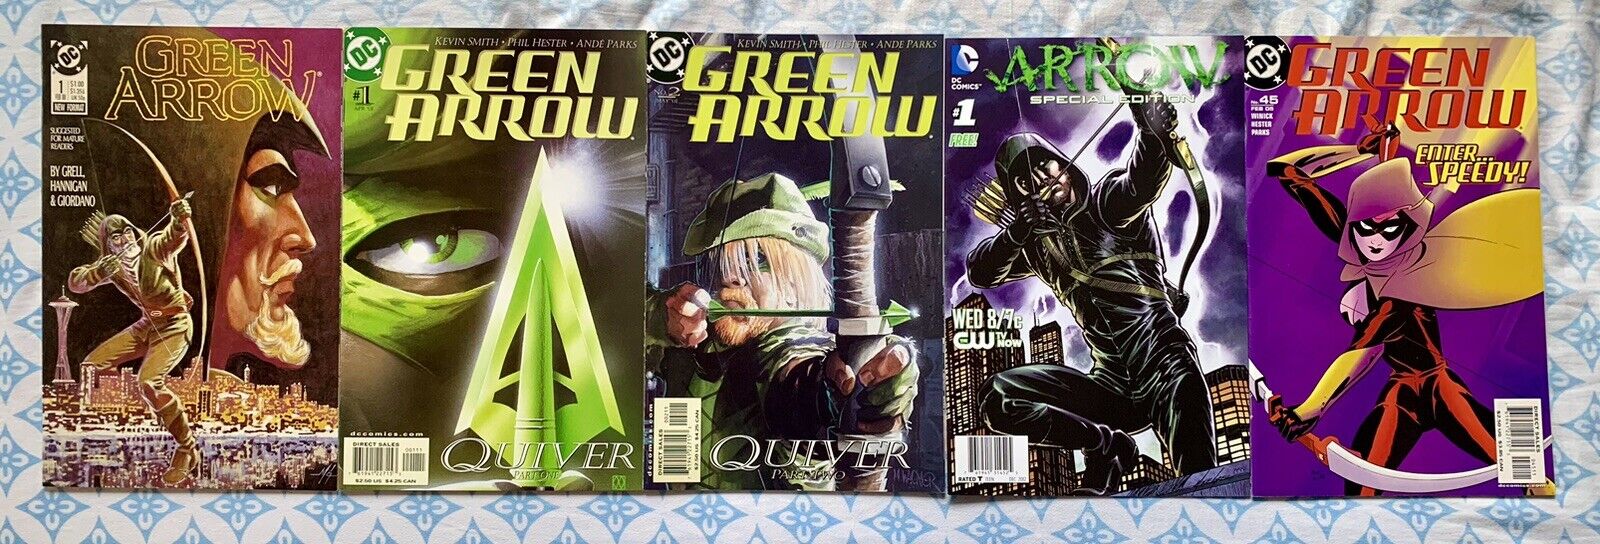 DC Comics Green Arrow Collection. Includes 1st appearance of Mia Dearden.